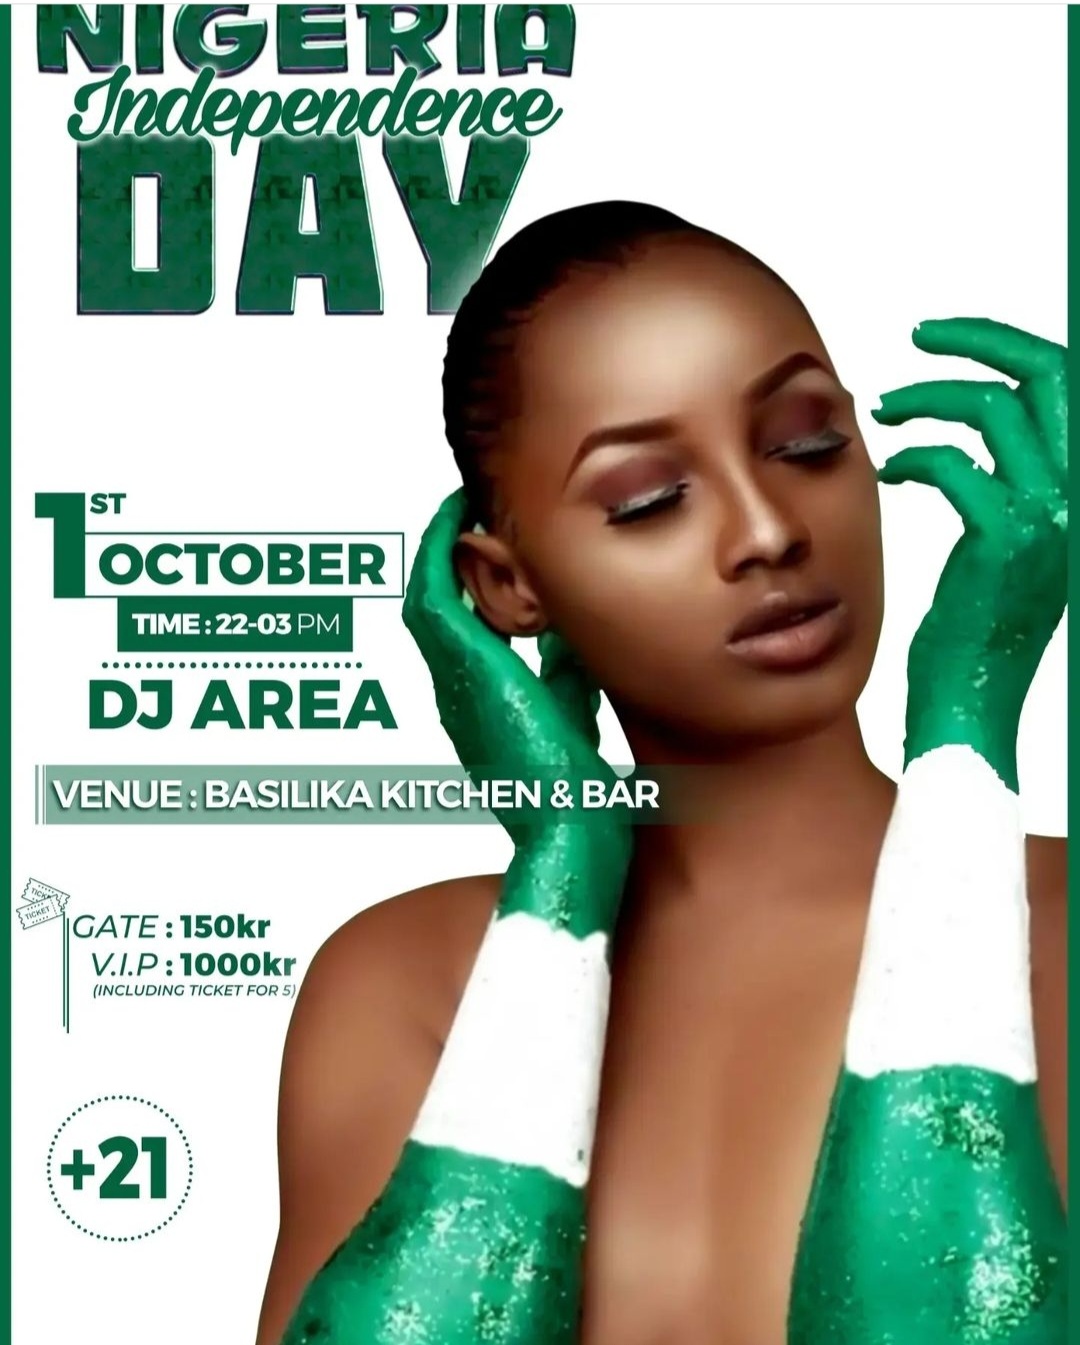 KLUBB! Nigeria Independence Day party!